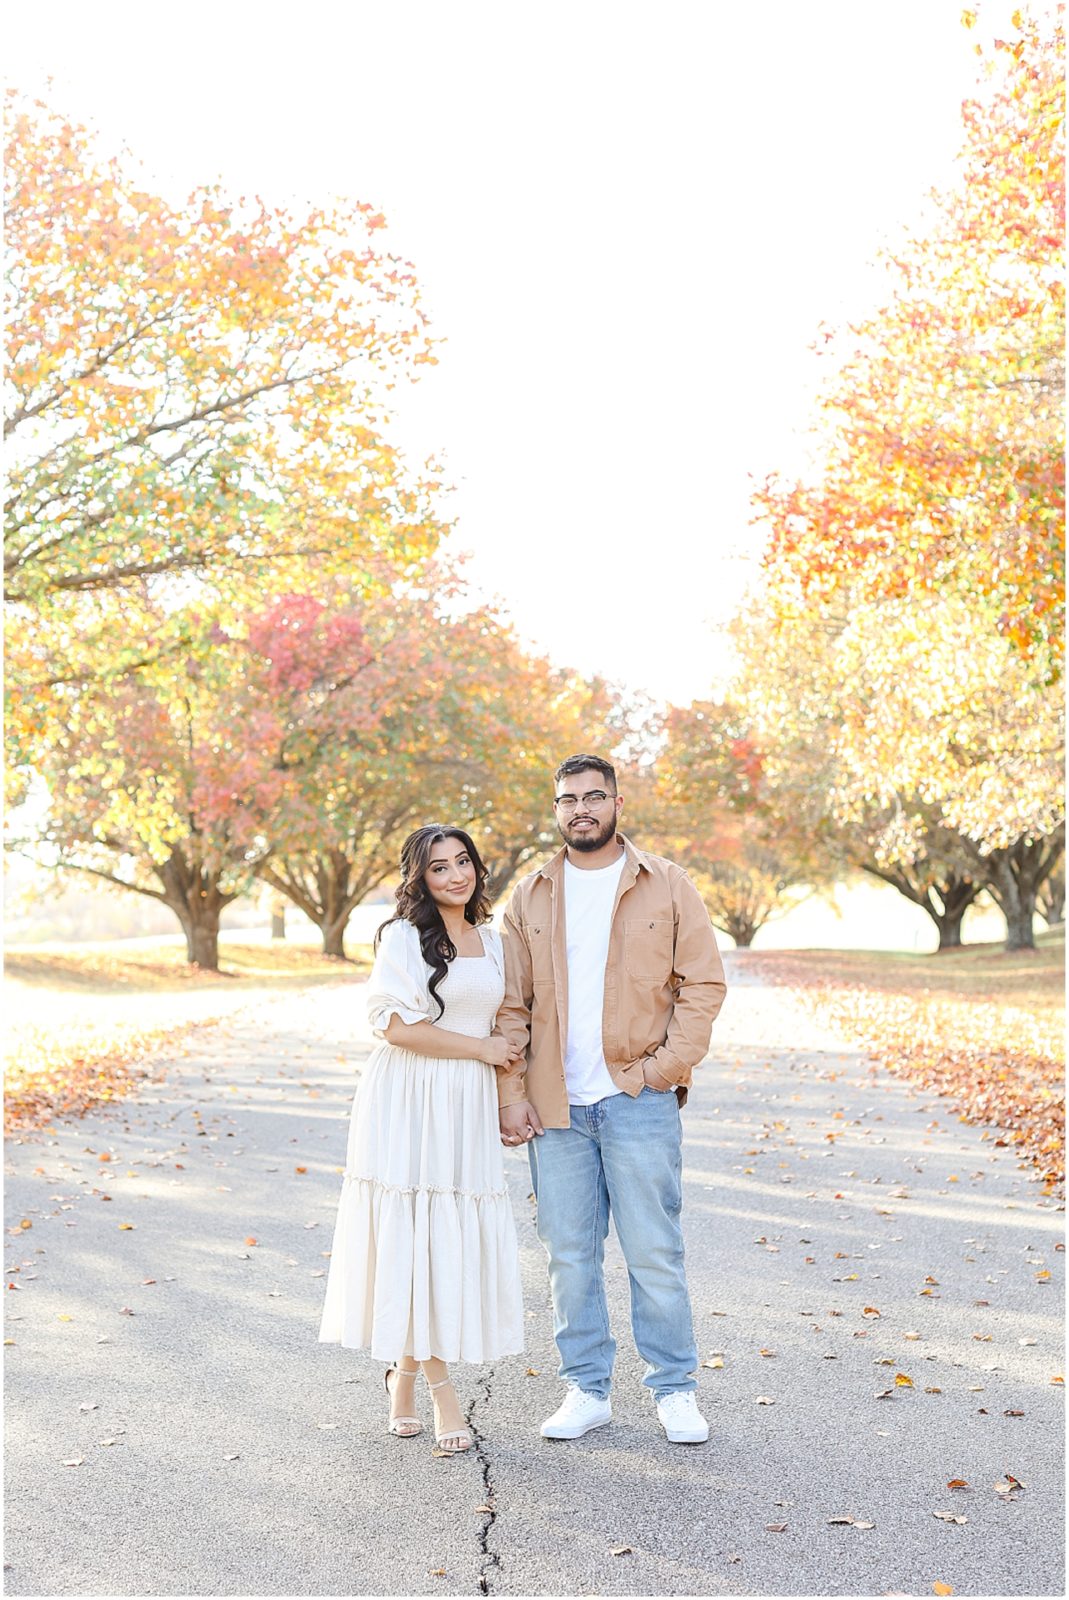 Family Photos | Family Photographer in Kansas | Family Photography Kansas City | Shawnee Mission Park | Where to take photos in the fall | What to wear for a fall engagement or family session | Kansas City Missouri Wedding & Portrait Photography | Happy Couple